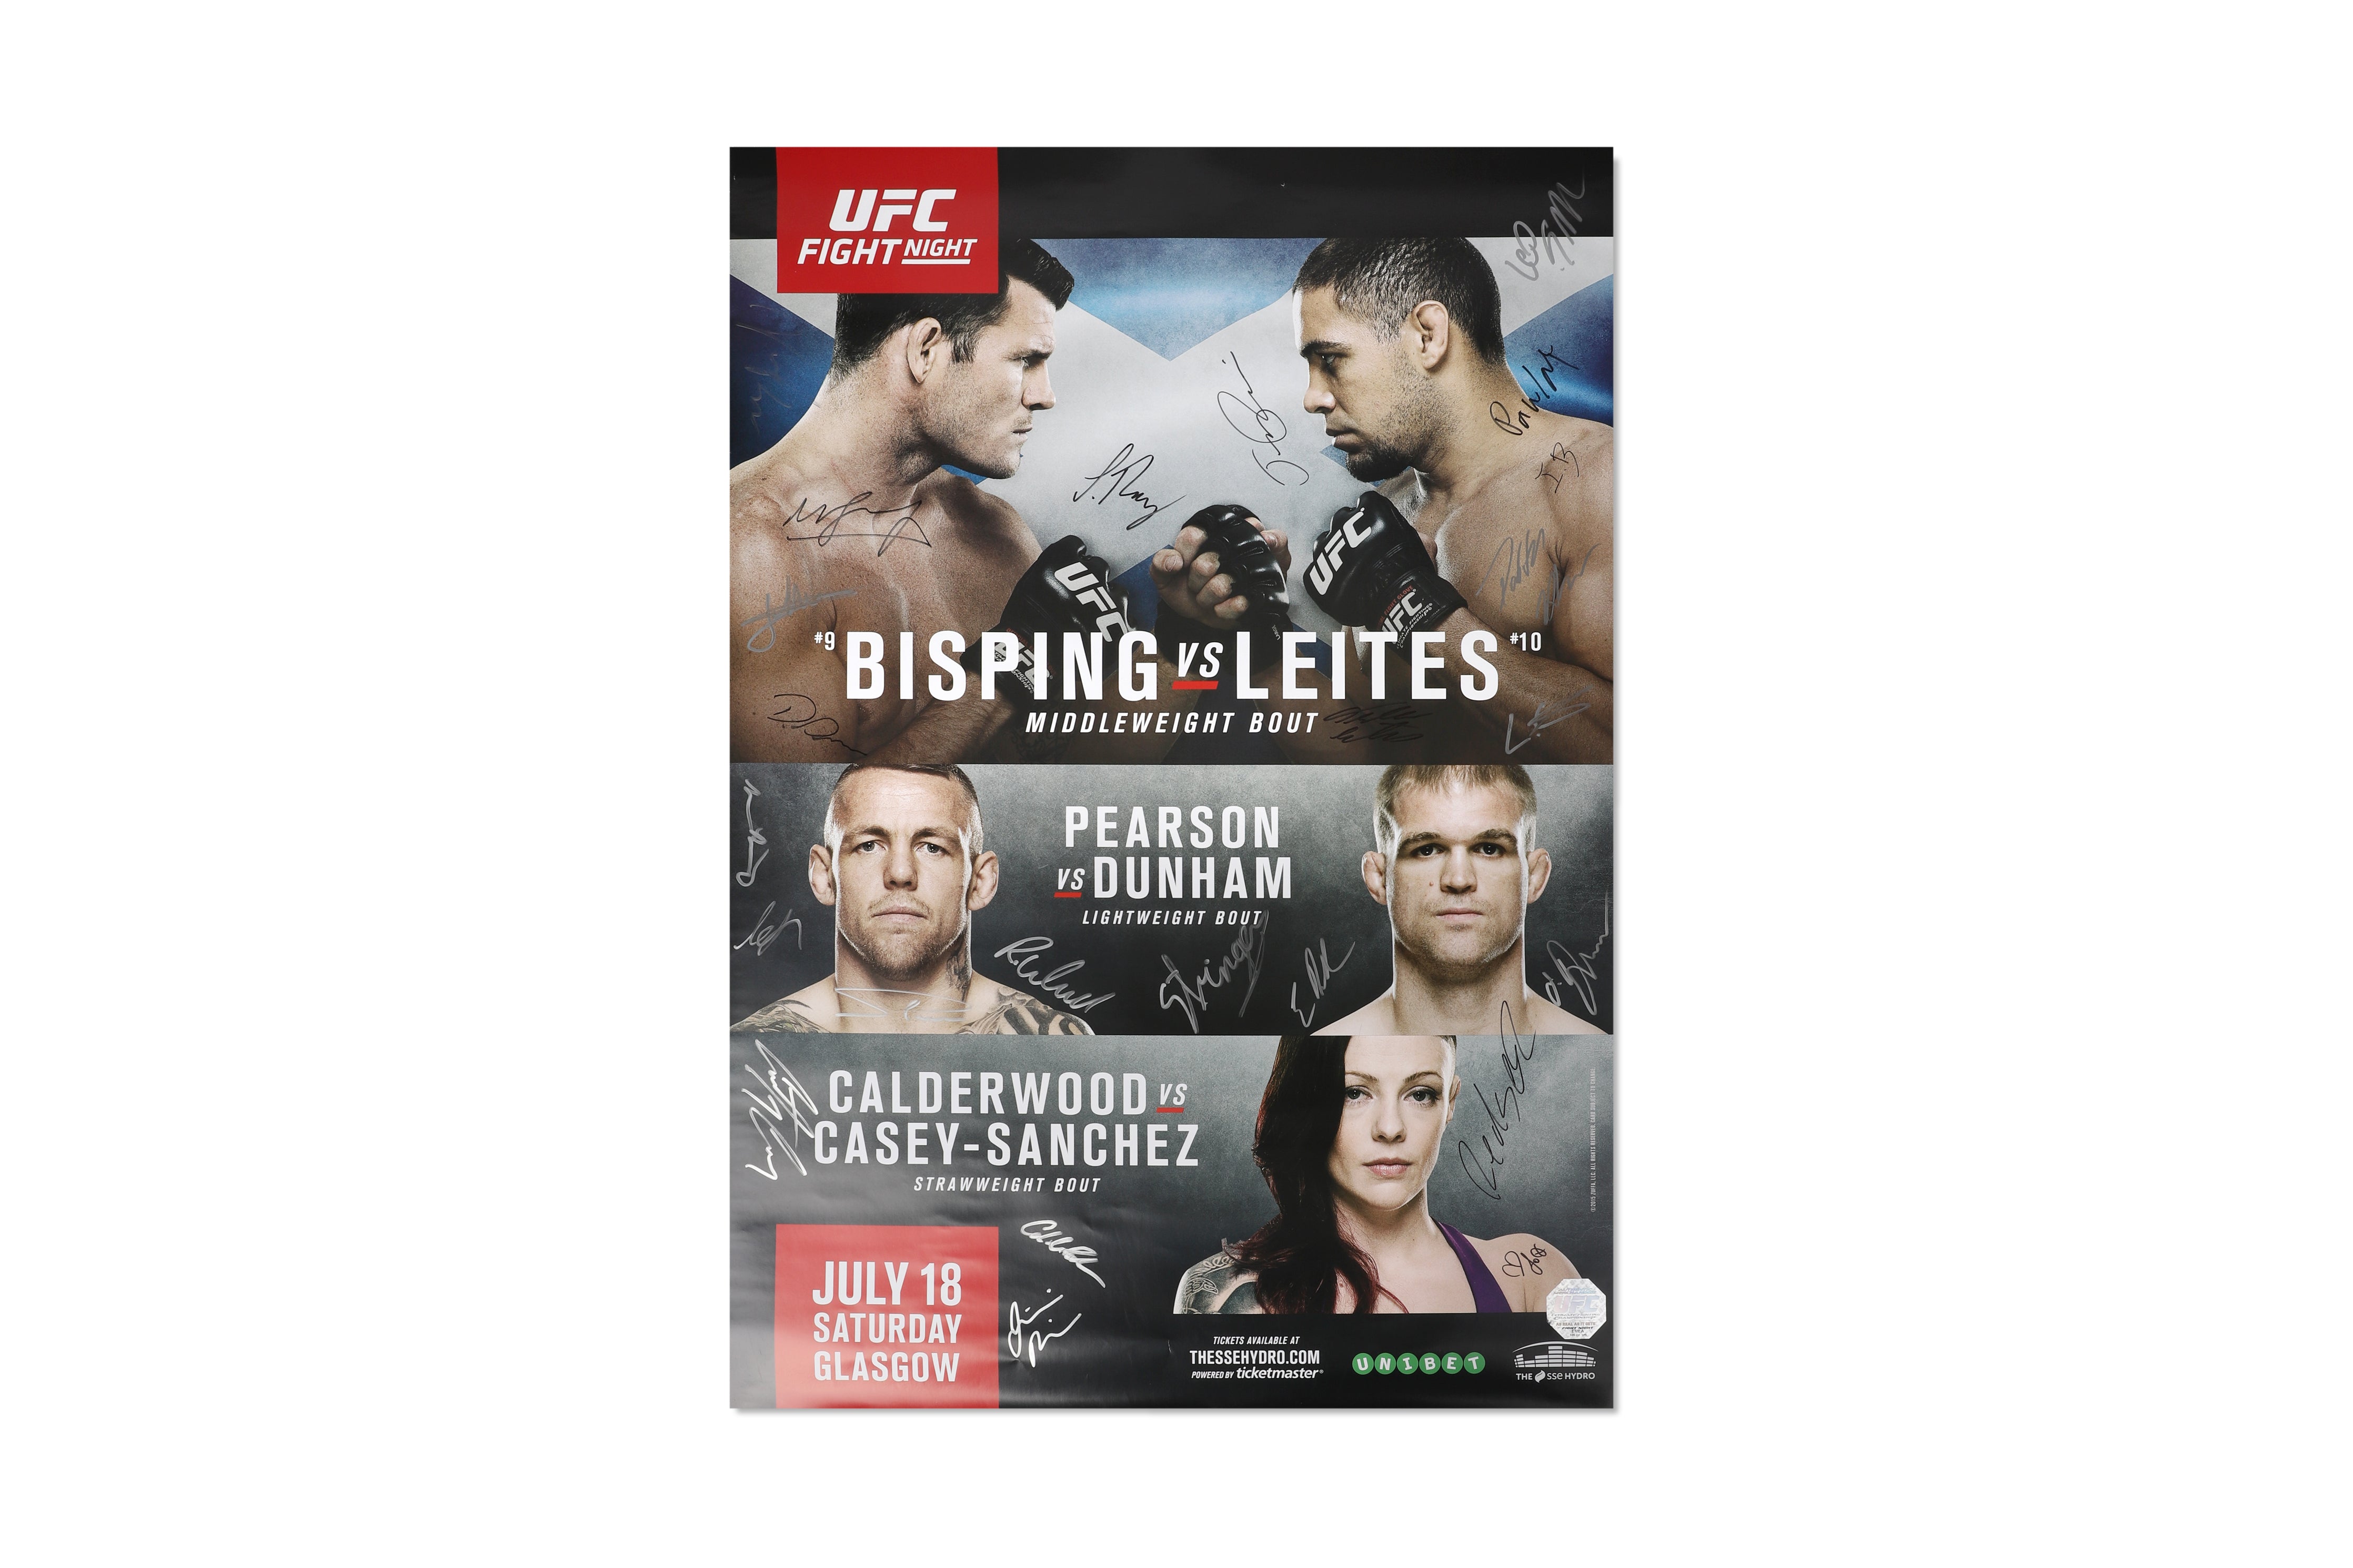 UFC Fight Night: Bisping vs Leites Autographed Event Poster